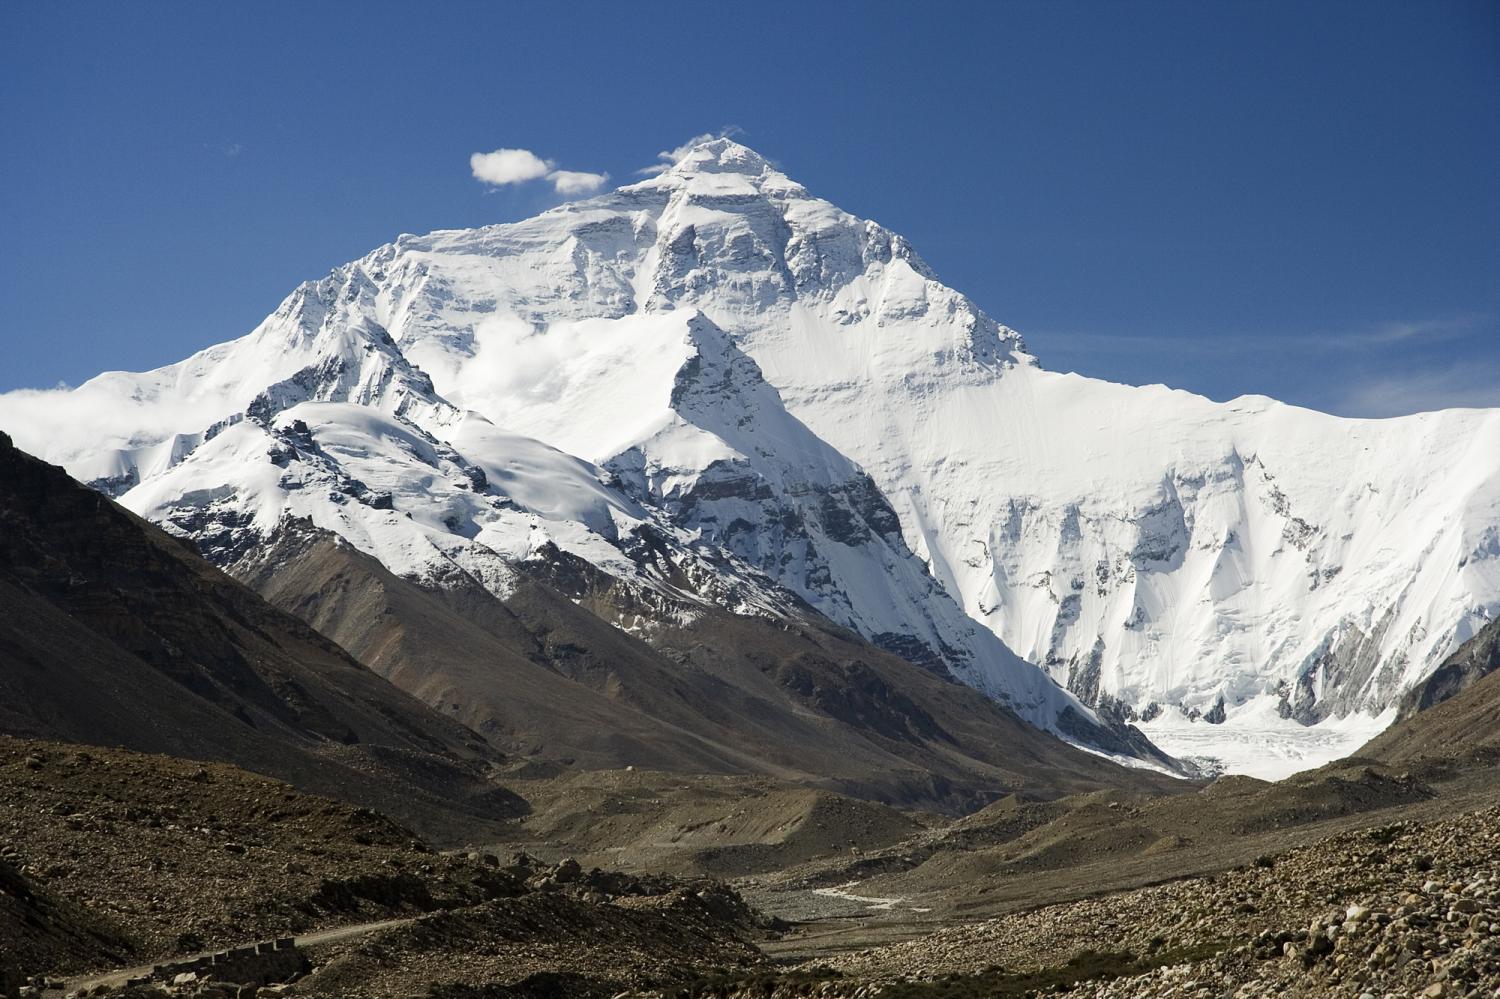 Mount Everest was first scaled 70 years ago. Climbers celebrate the  milestone as climate change concerns grow